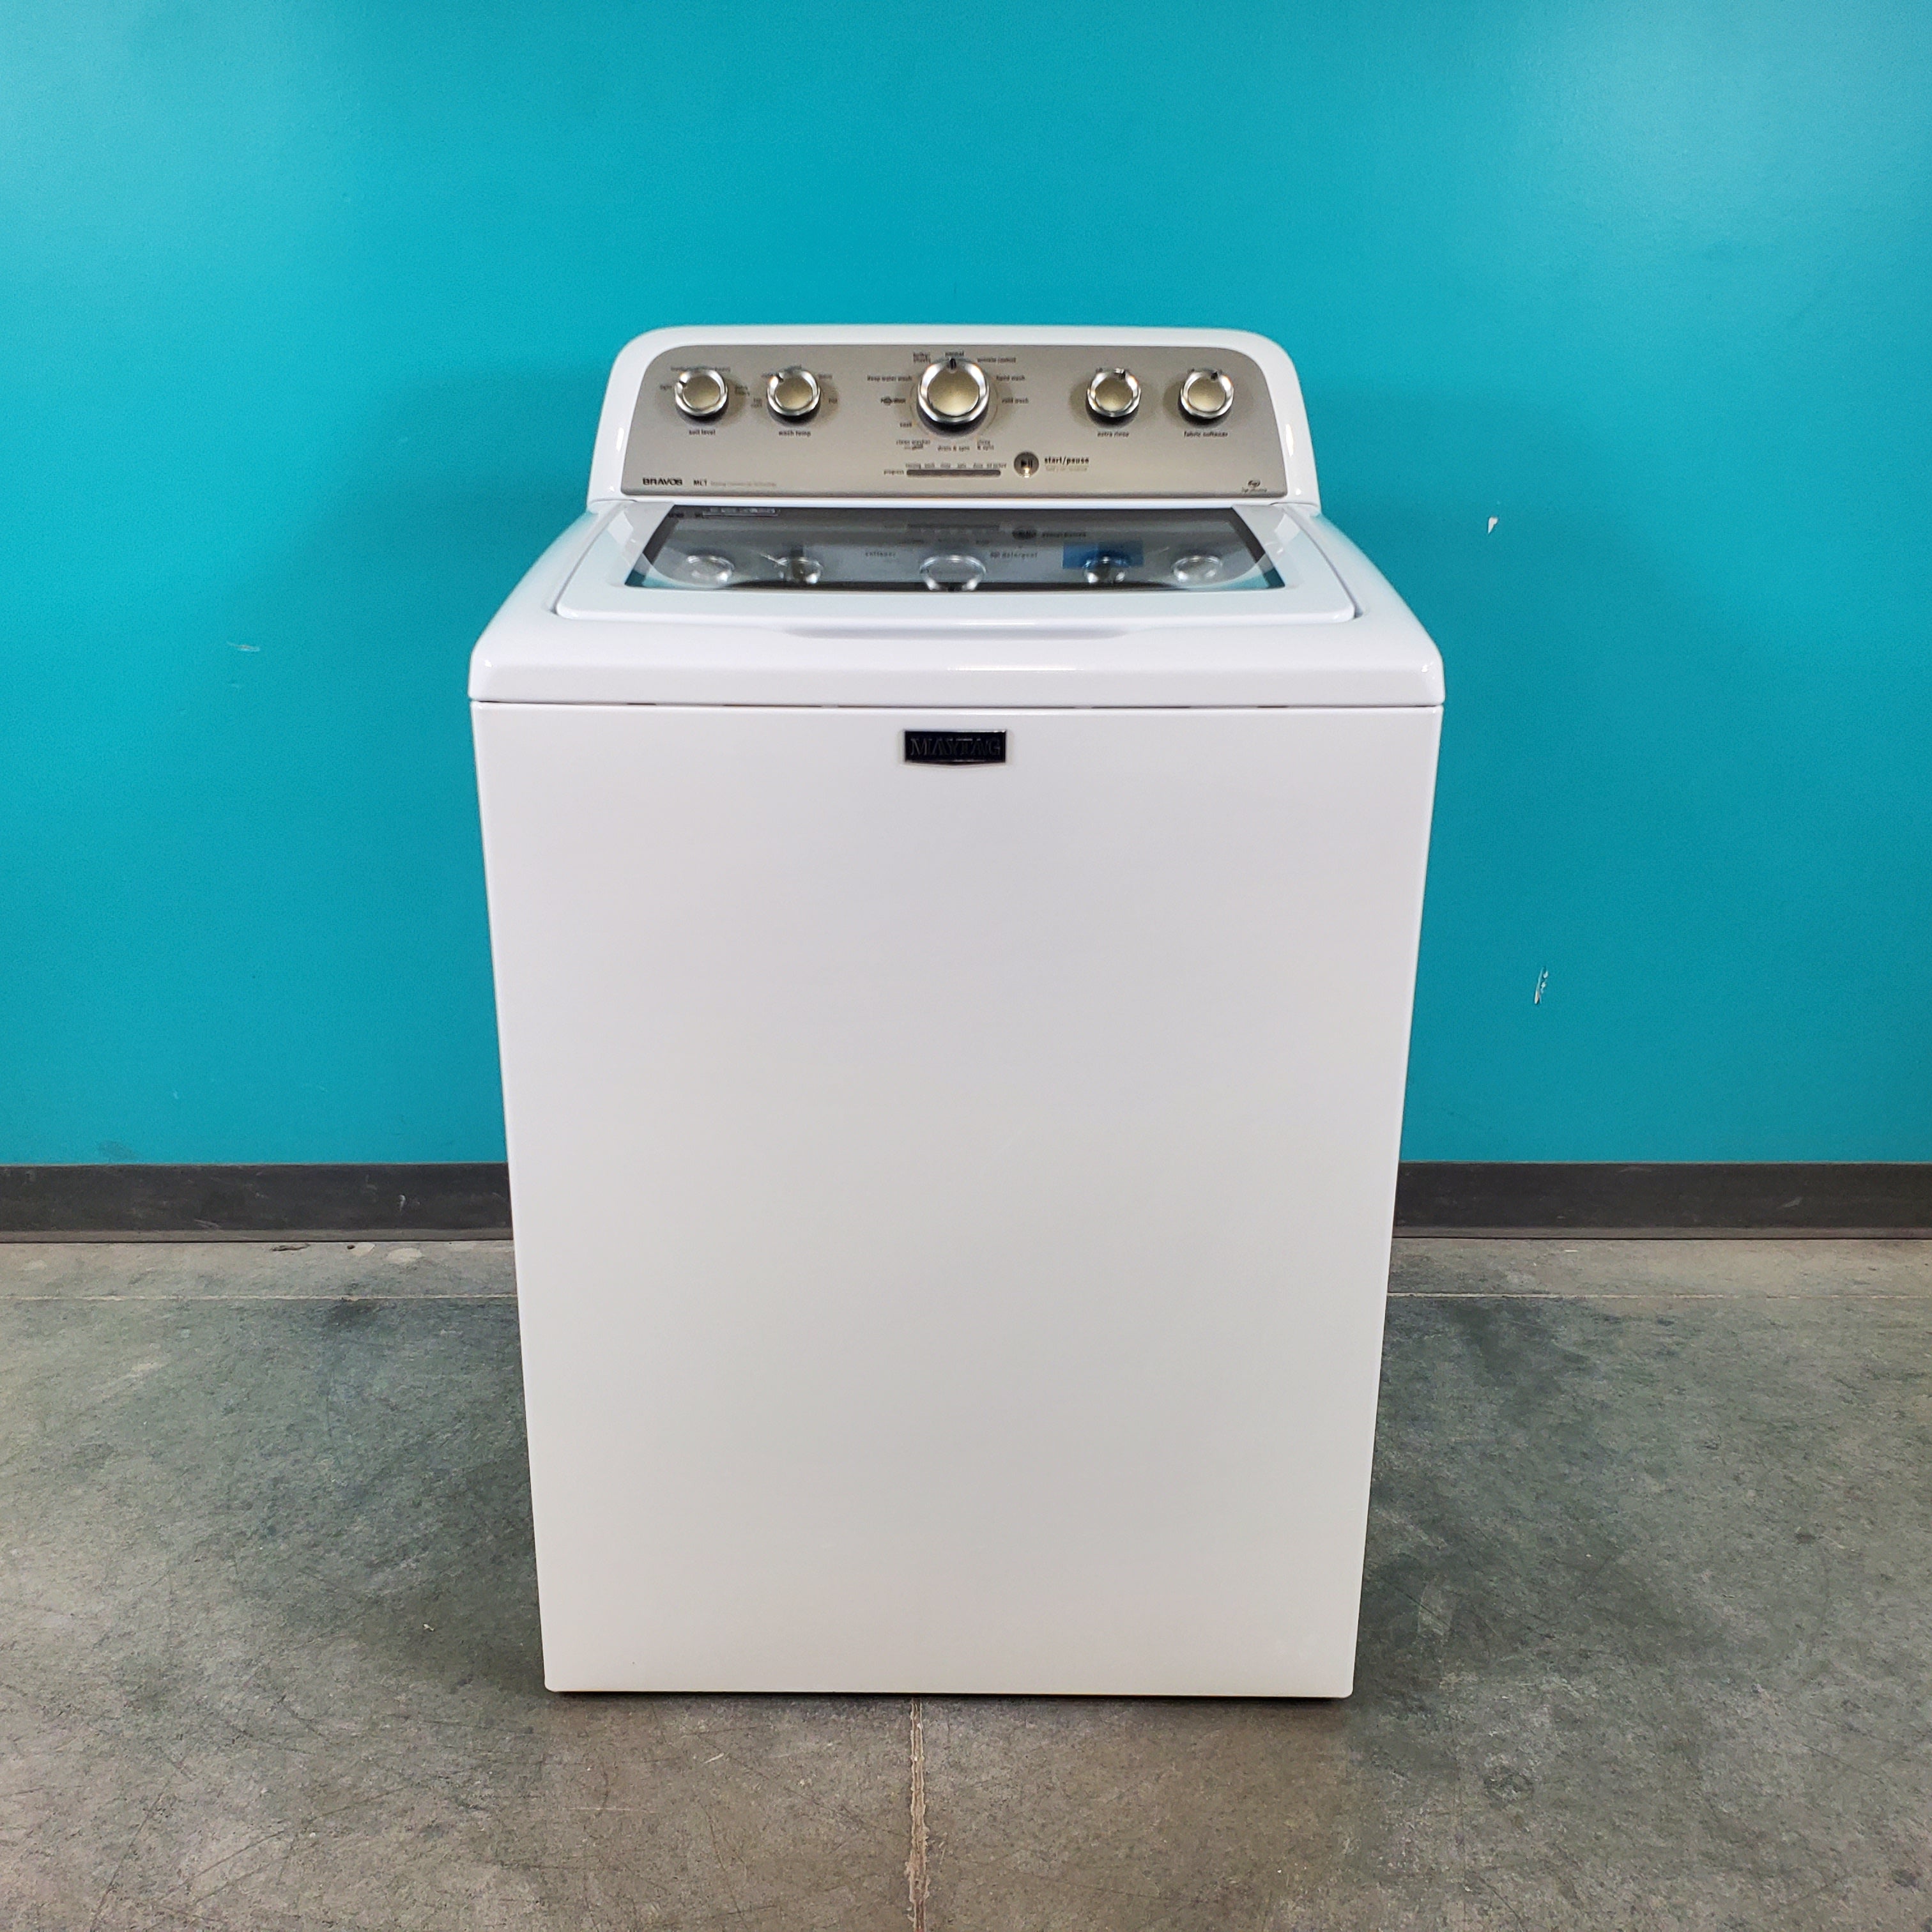 Pictures of Neu Elite Maytag Bravos High Capacity 4.3 cu. ft. Impeller Top Load HE Washing Machine With Extra Water Cycle / Option - Certified Refurbished - Neu Appliance Outlet - Discount Appliance Outlet in Austin, Tx